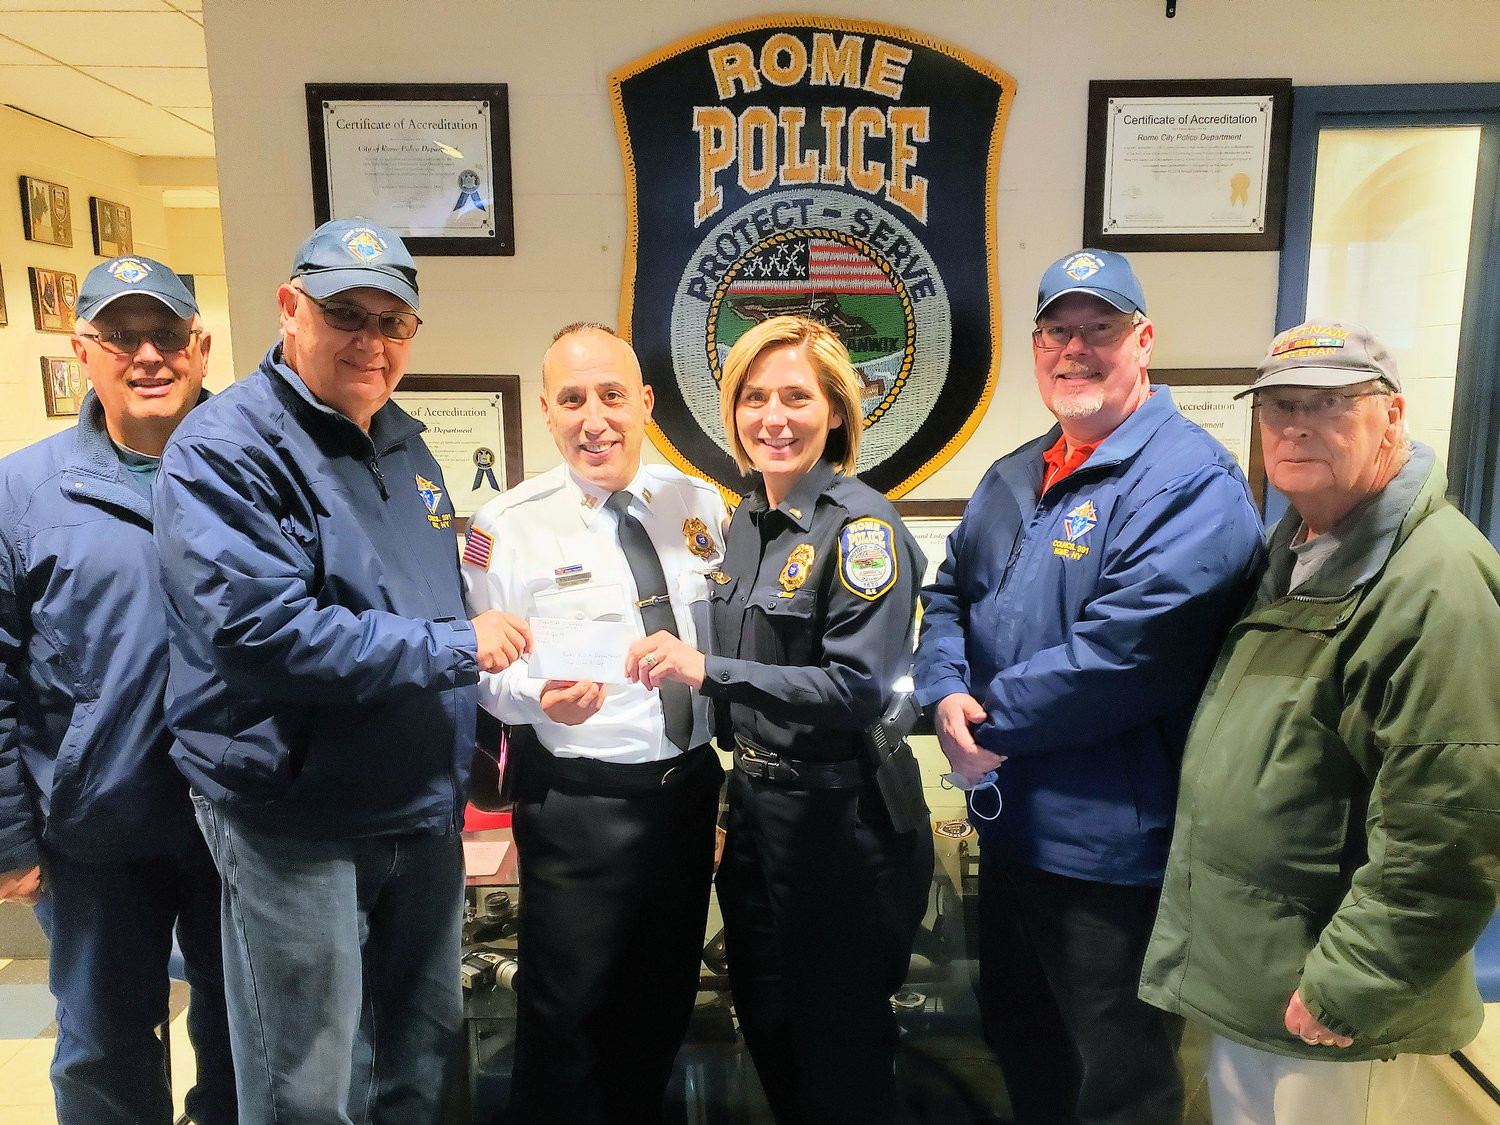 READY TO SHOP — The Rome Council #391 of the Knights of Columbus has begun its 2021 Season of Charitable Giving, presenting a $1,000 check to the Rome Police Benevolent Fund’s “Shop With a Cop” program.  From left: Joseph Carolla, Knights of Columbus trustee; David Zasada, KOC grand knight; Police Capt. Thomas Corigliano; Lt. Sharon Rood; Kevin Piatt, deputy grand knight; and M. Tedd Kehoe, KOC financial secretary. The annual Shop with a Cop event will be held in December, police officials said. To learn more about the Knights, see their website at kofc.org.